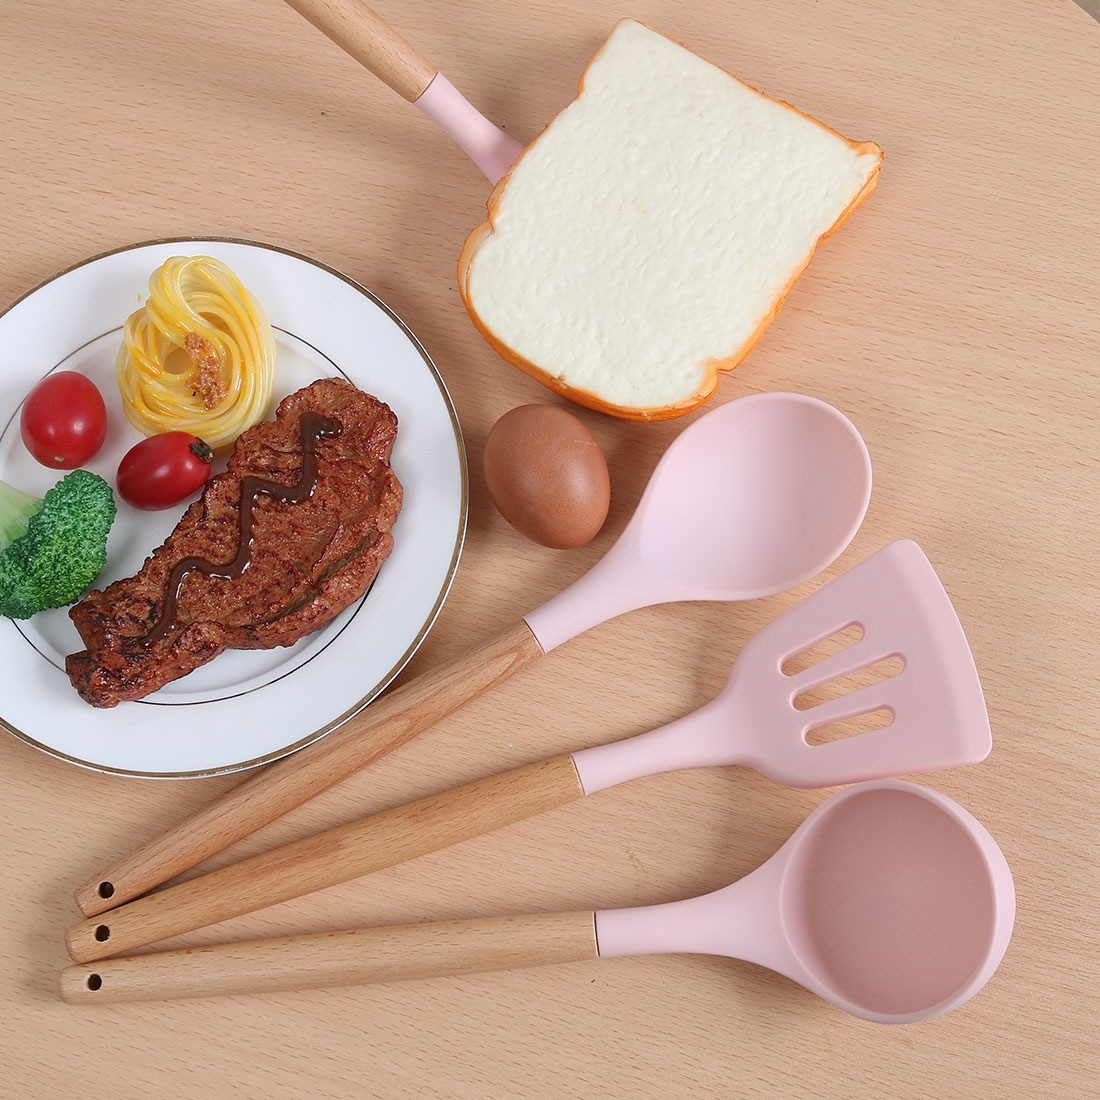 https://ak1.ostkcdn.com/images/products/is/images/direct/4f1597040dd486c956dbd27a8a5be1009b39ecf9/4pcs-Silicone-Spatula-Set-Heat-Resistant-Non-scratchKitchen-Cooking.jpg